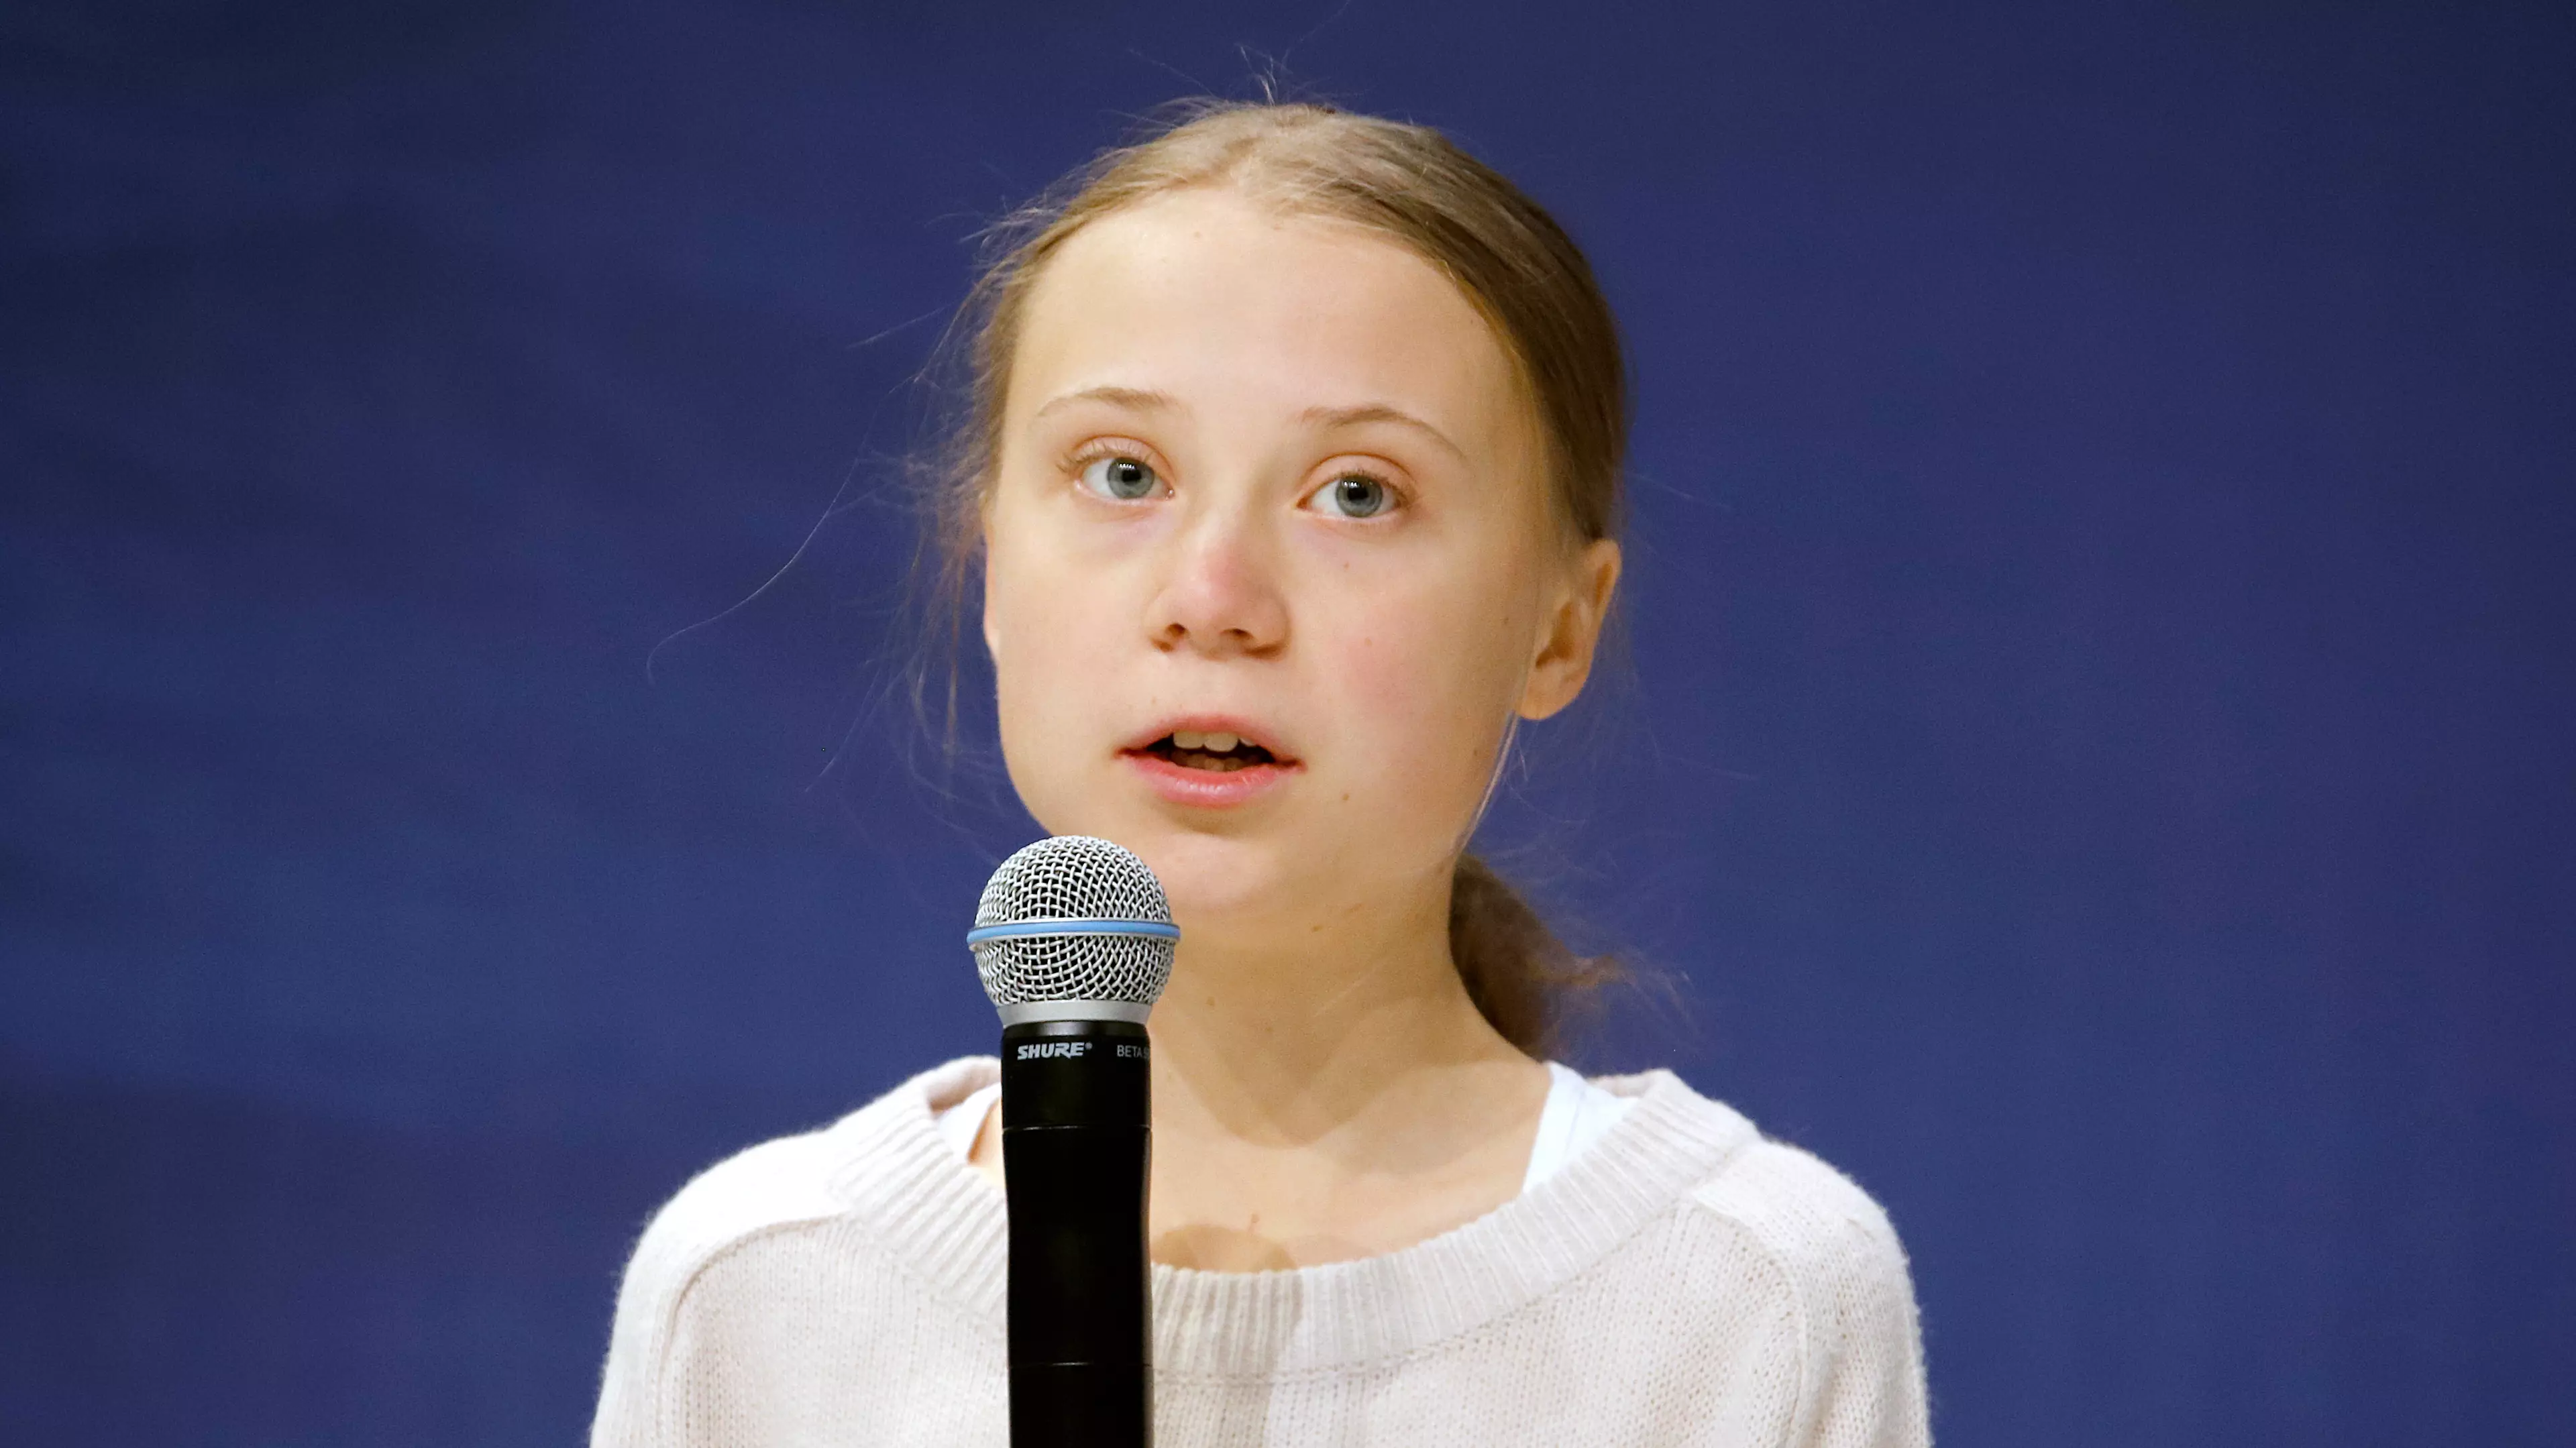 Documentary About Greta Thunberg Will Be Released Next Year